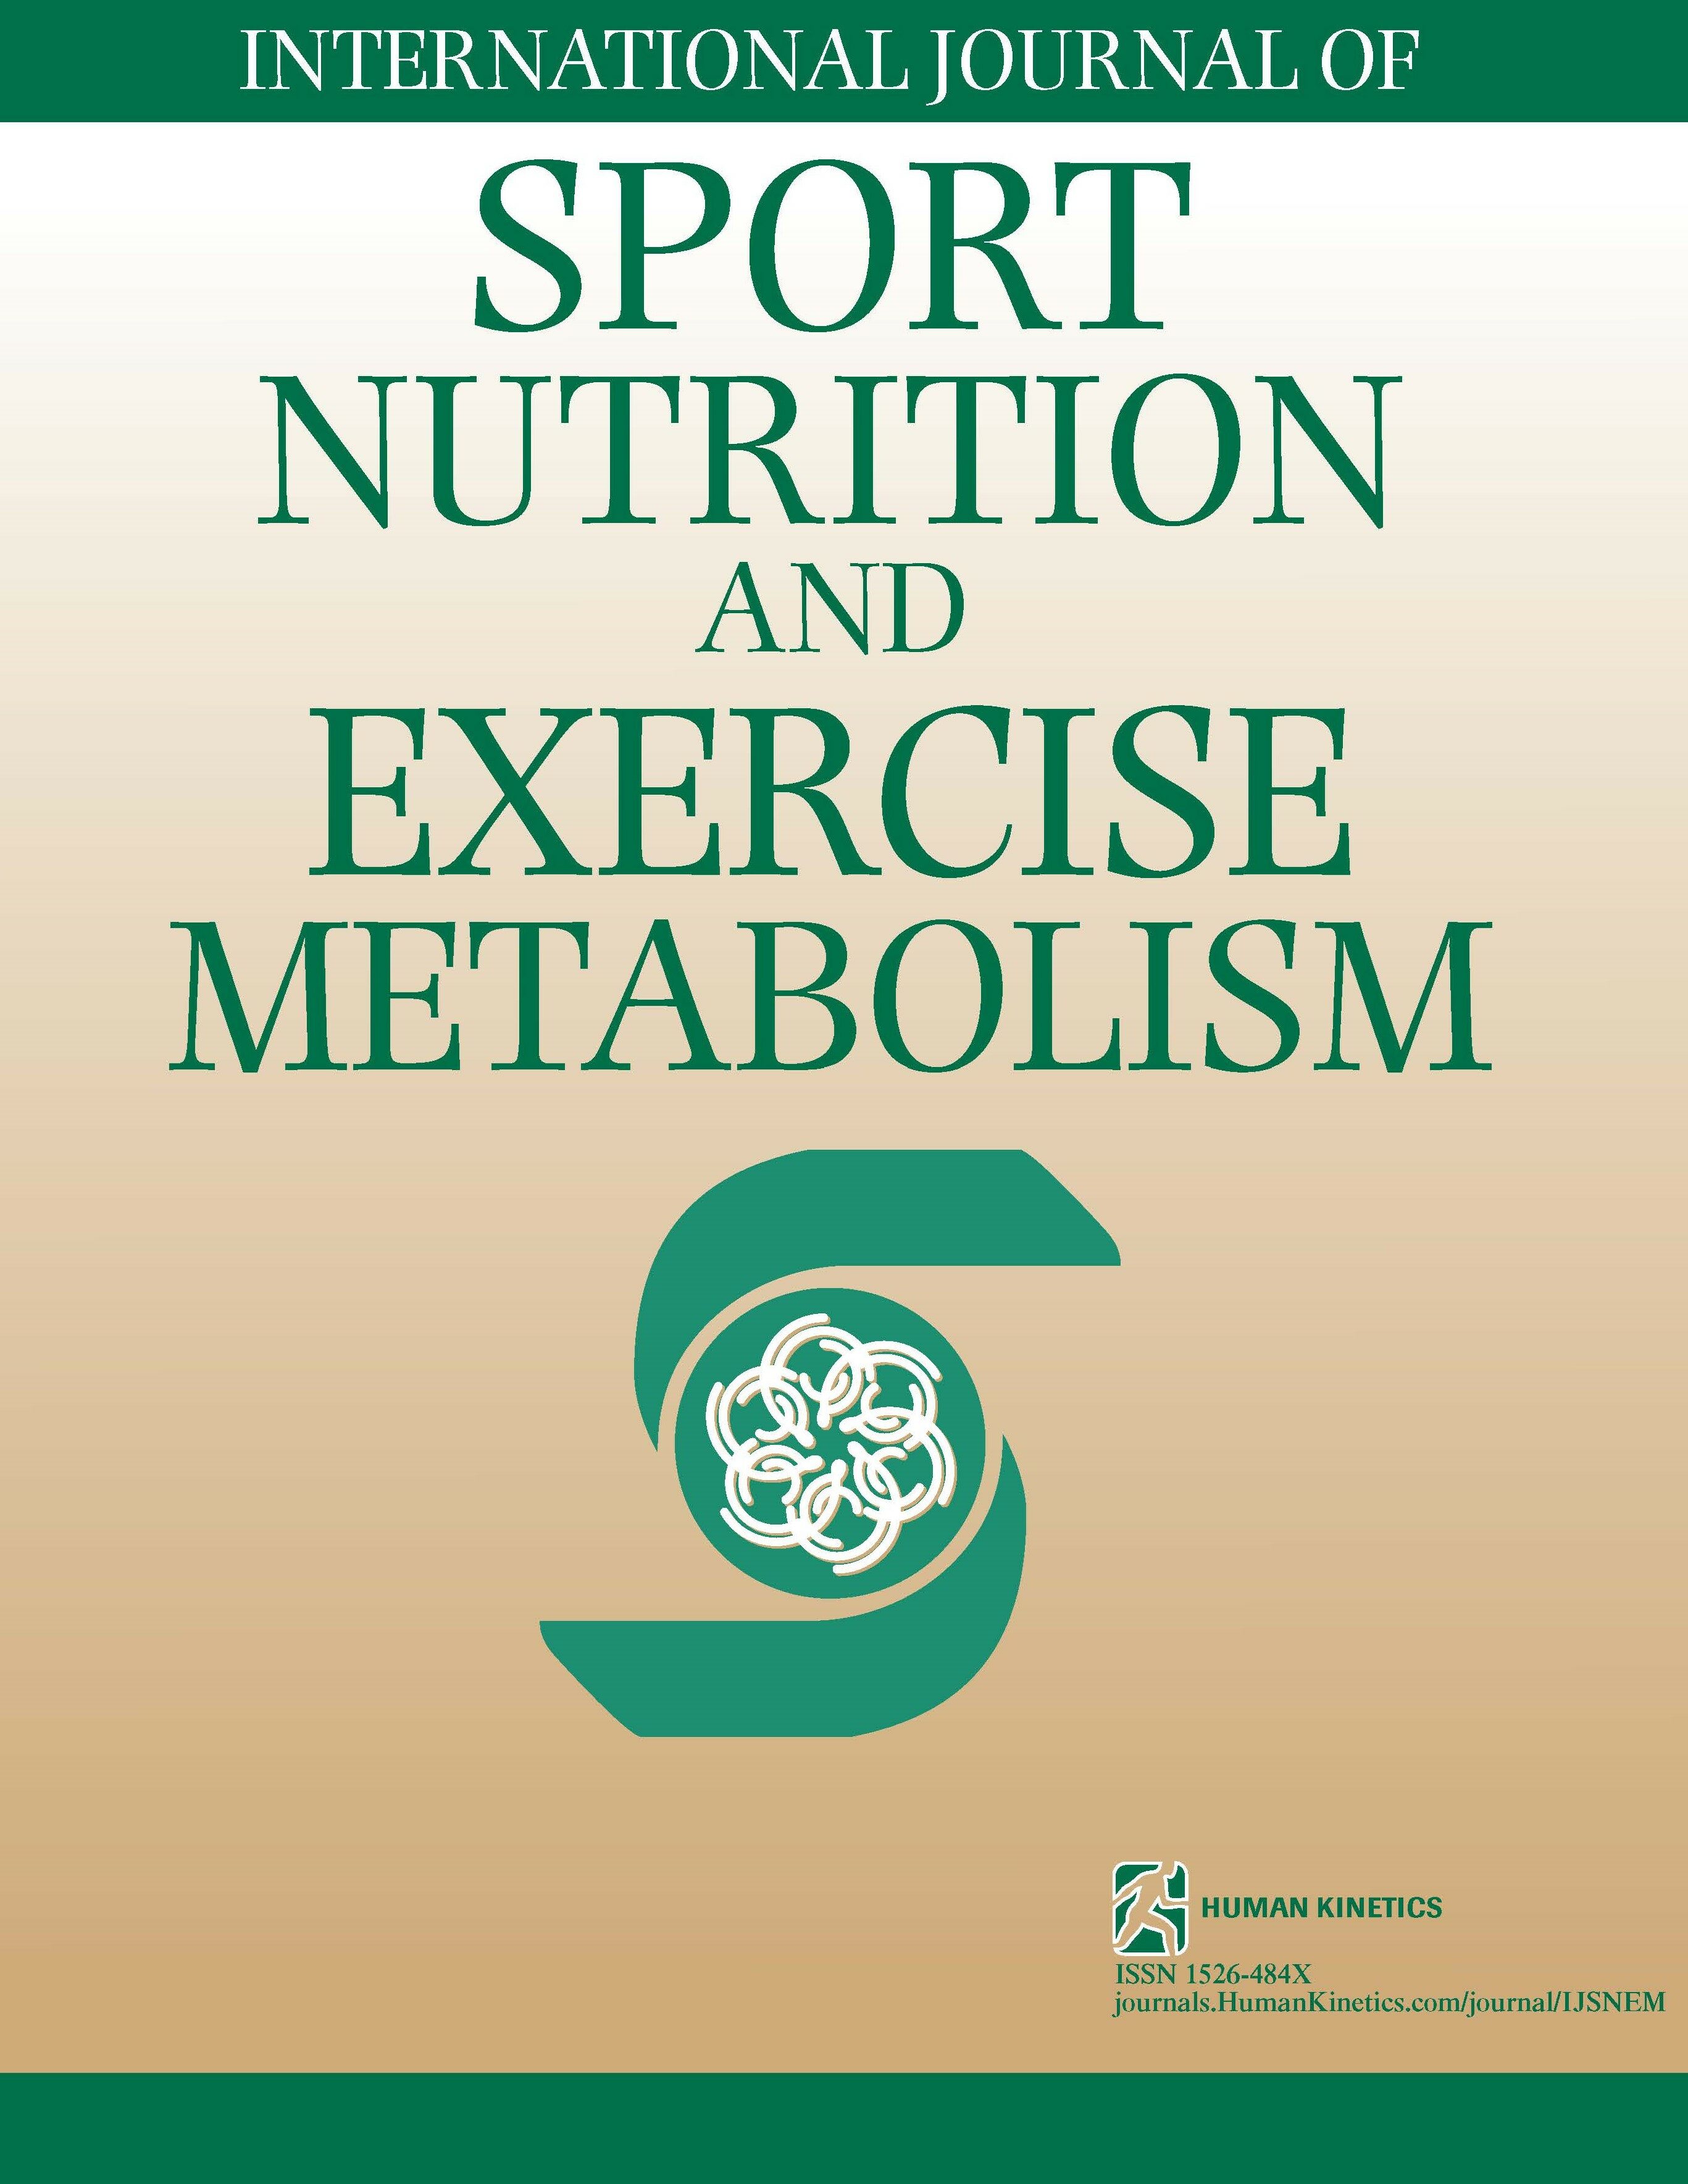 Effects of Changes in Body Fat Mass as a Result of Regular Exercise on Hemoglobin A1c in Patients With Type 2 Diabetes Mellitus: A Meta-Analysis